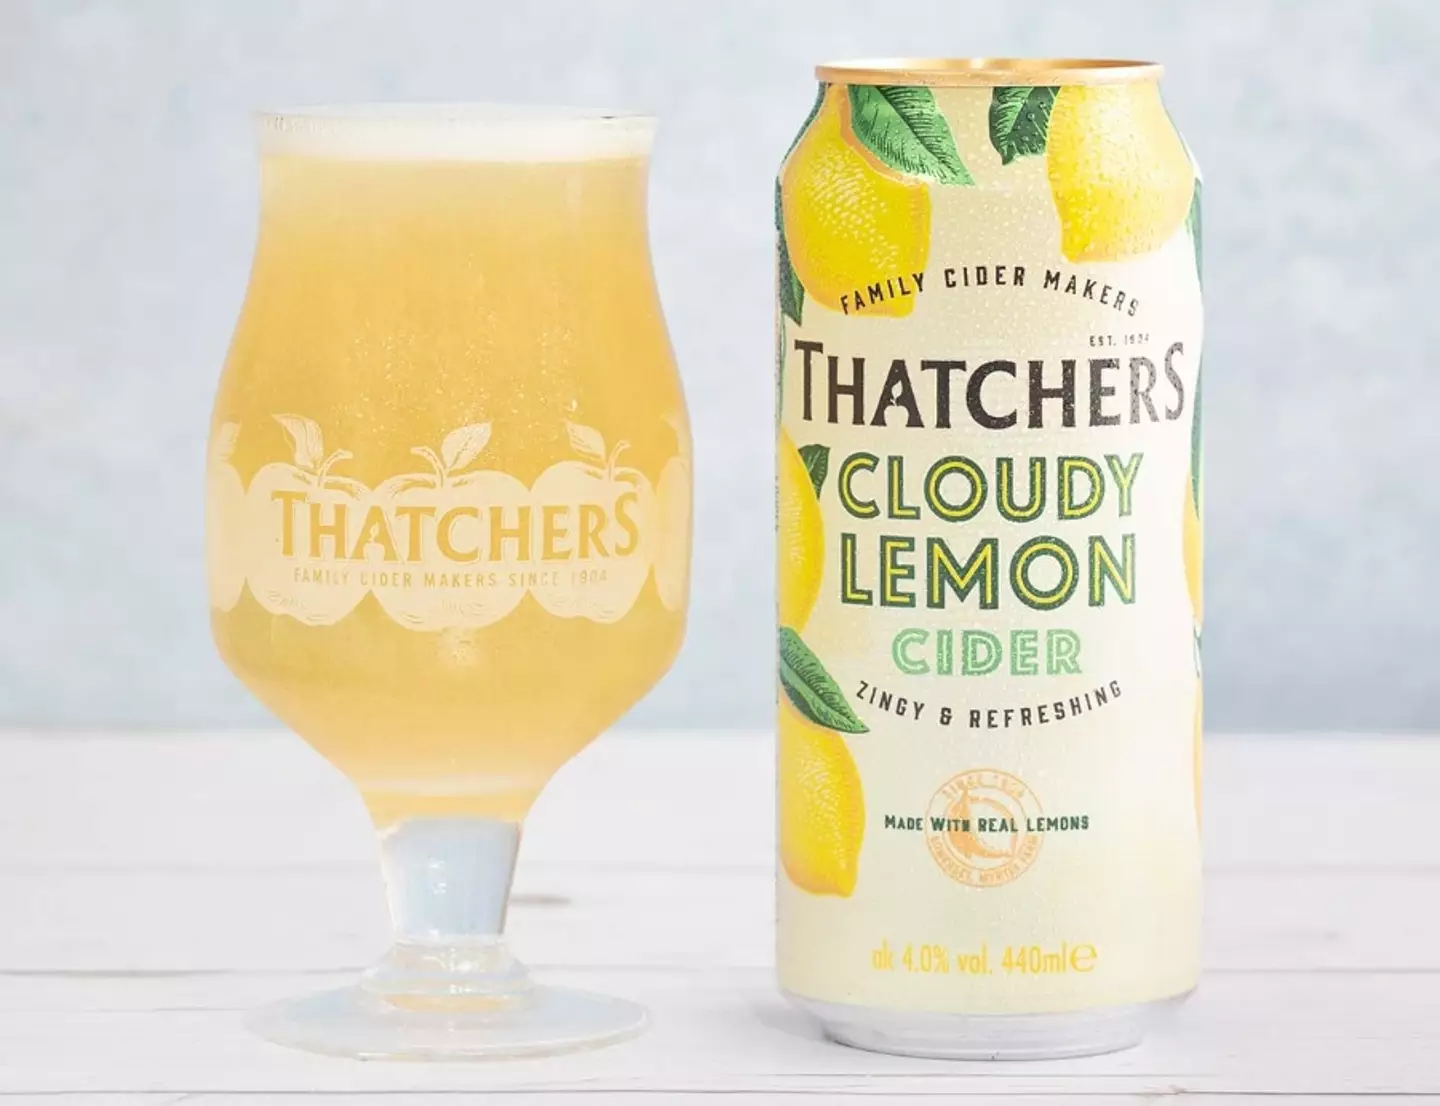 With pungent aroma, cloudy appearance and lemony taste this is the drink Thatchers claimed Aldi copied.